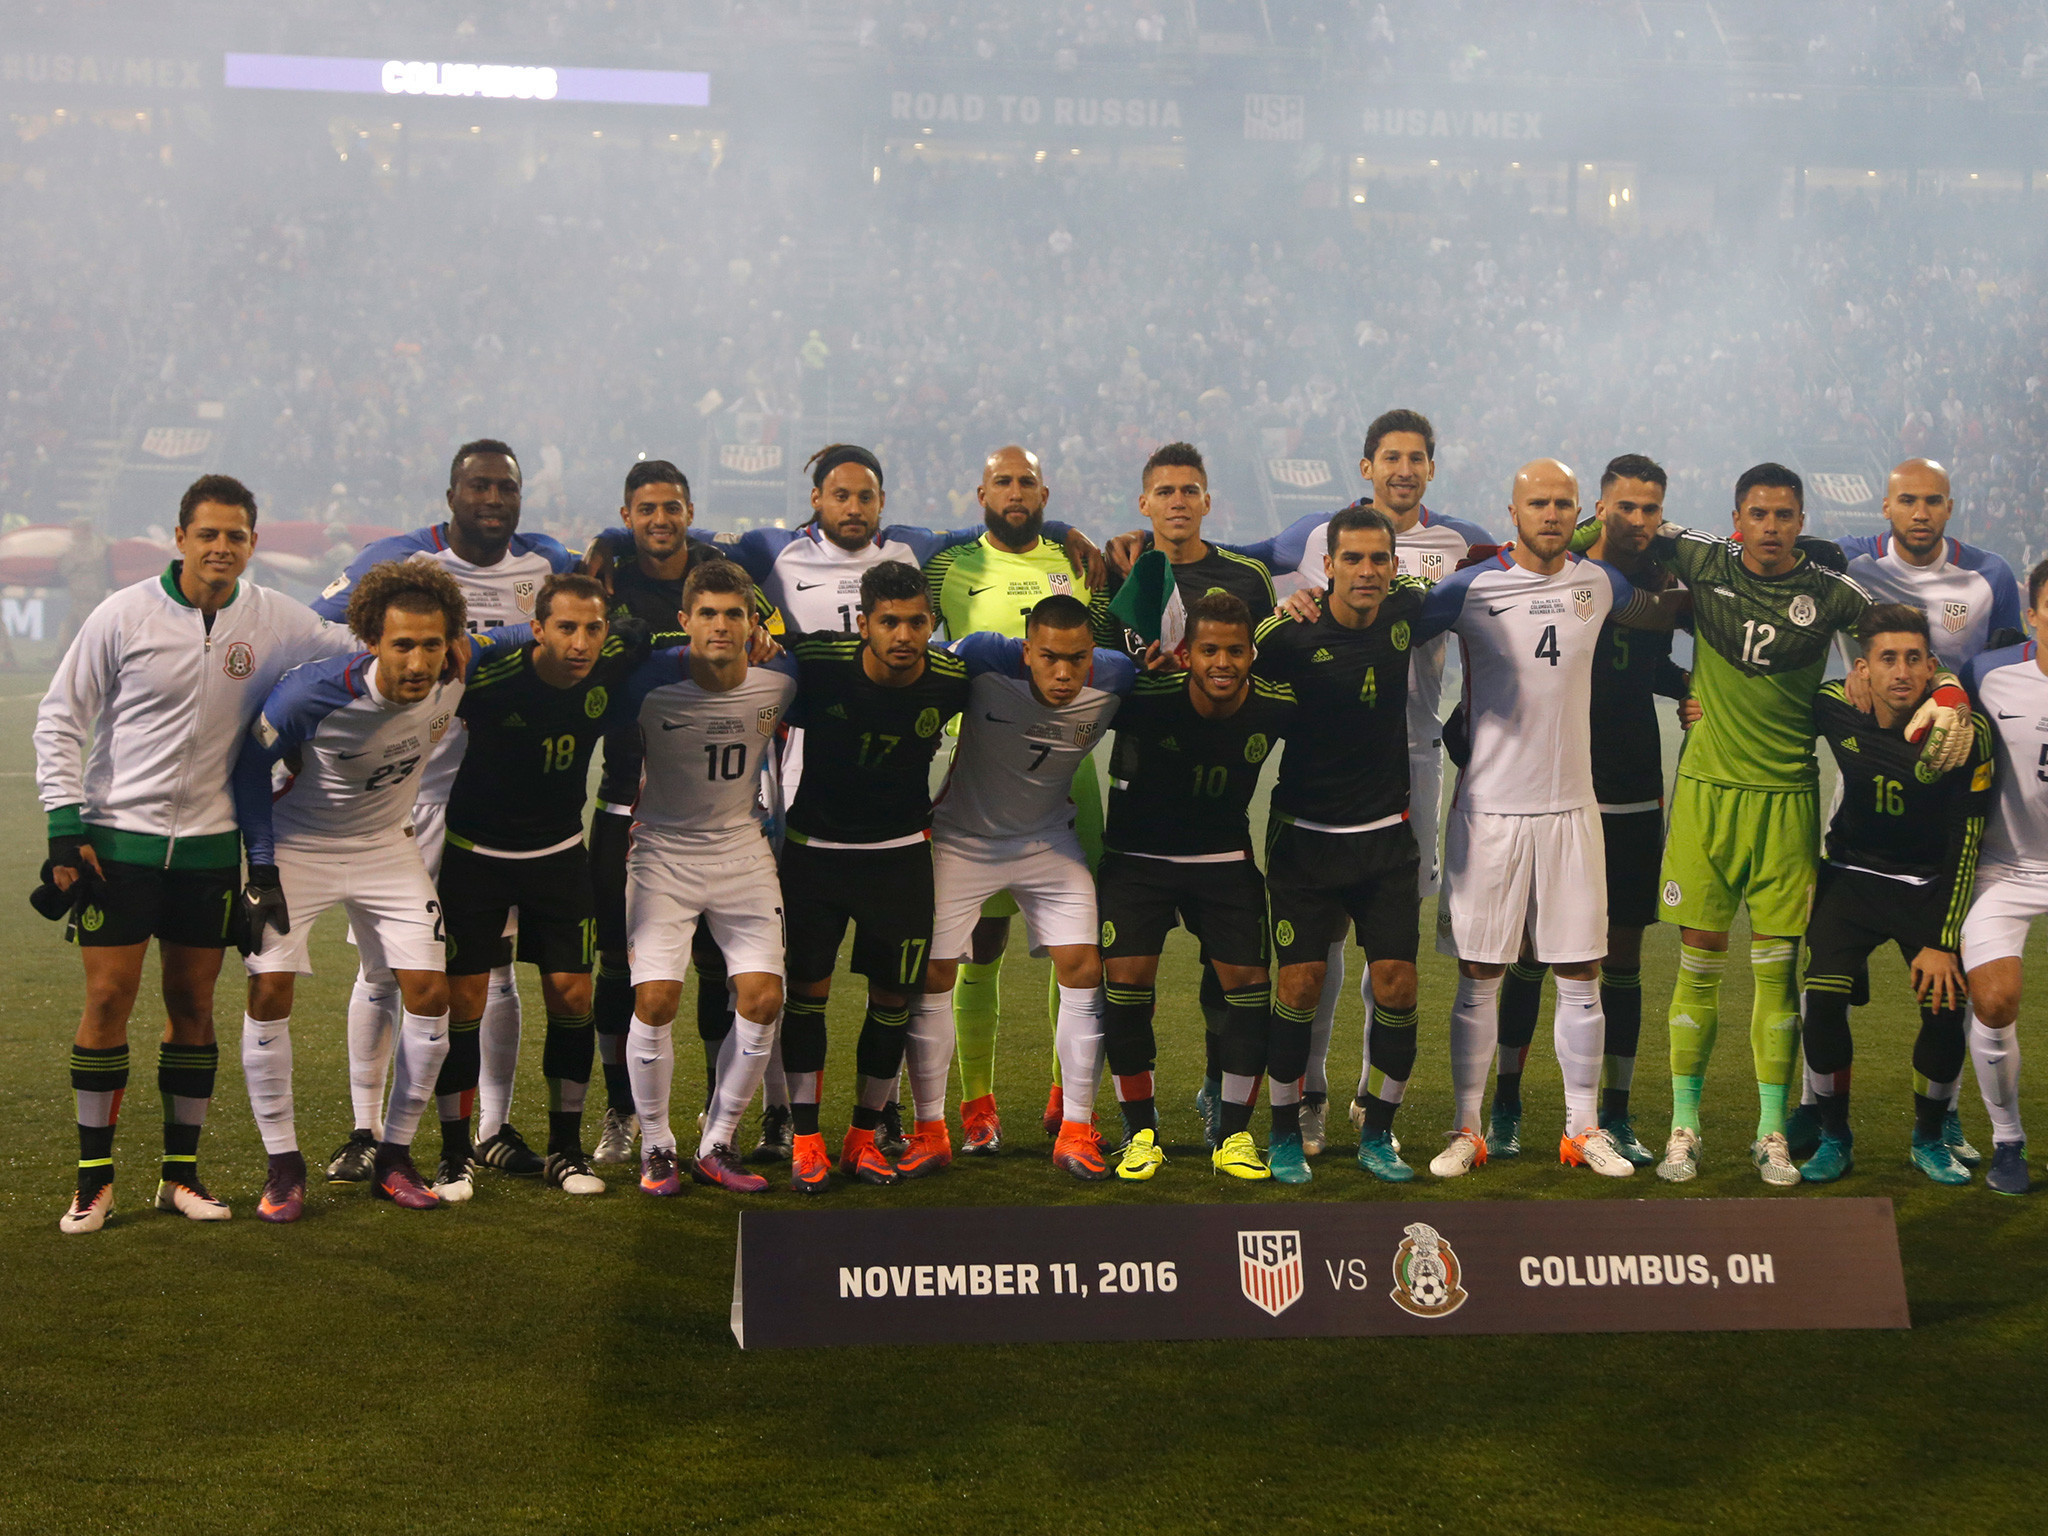 2048x1536   United States and Mexico form 'unity wall' before match  after Donald Trump's presidential